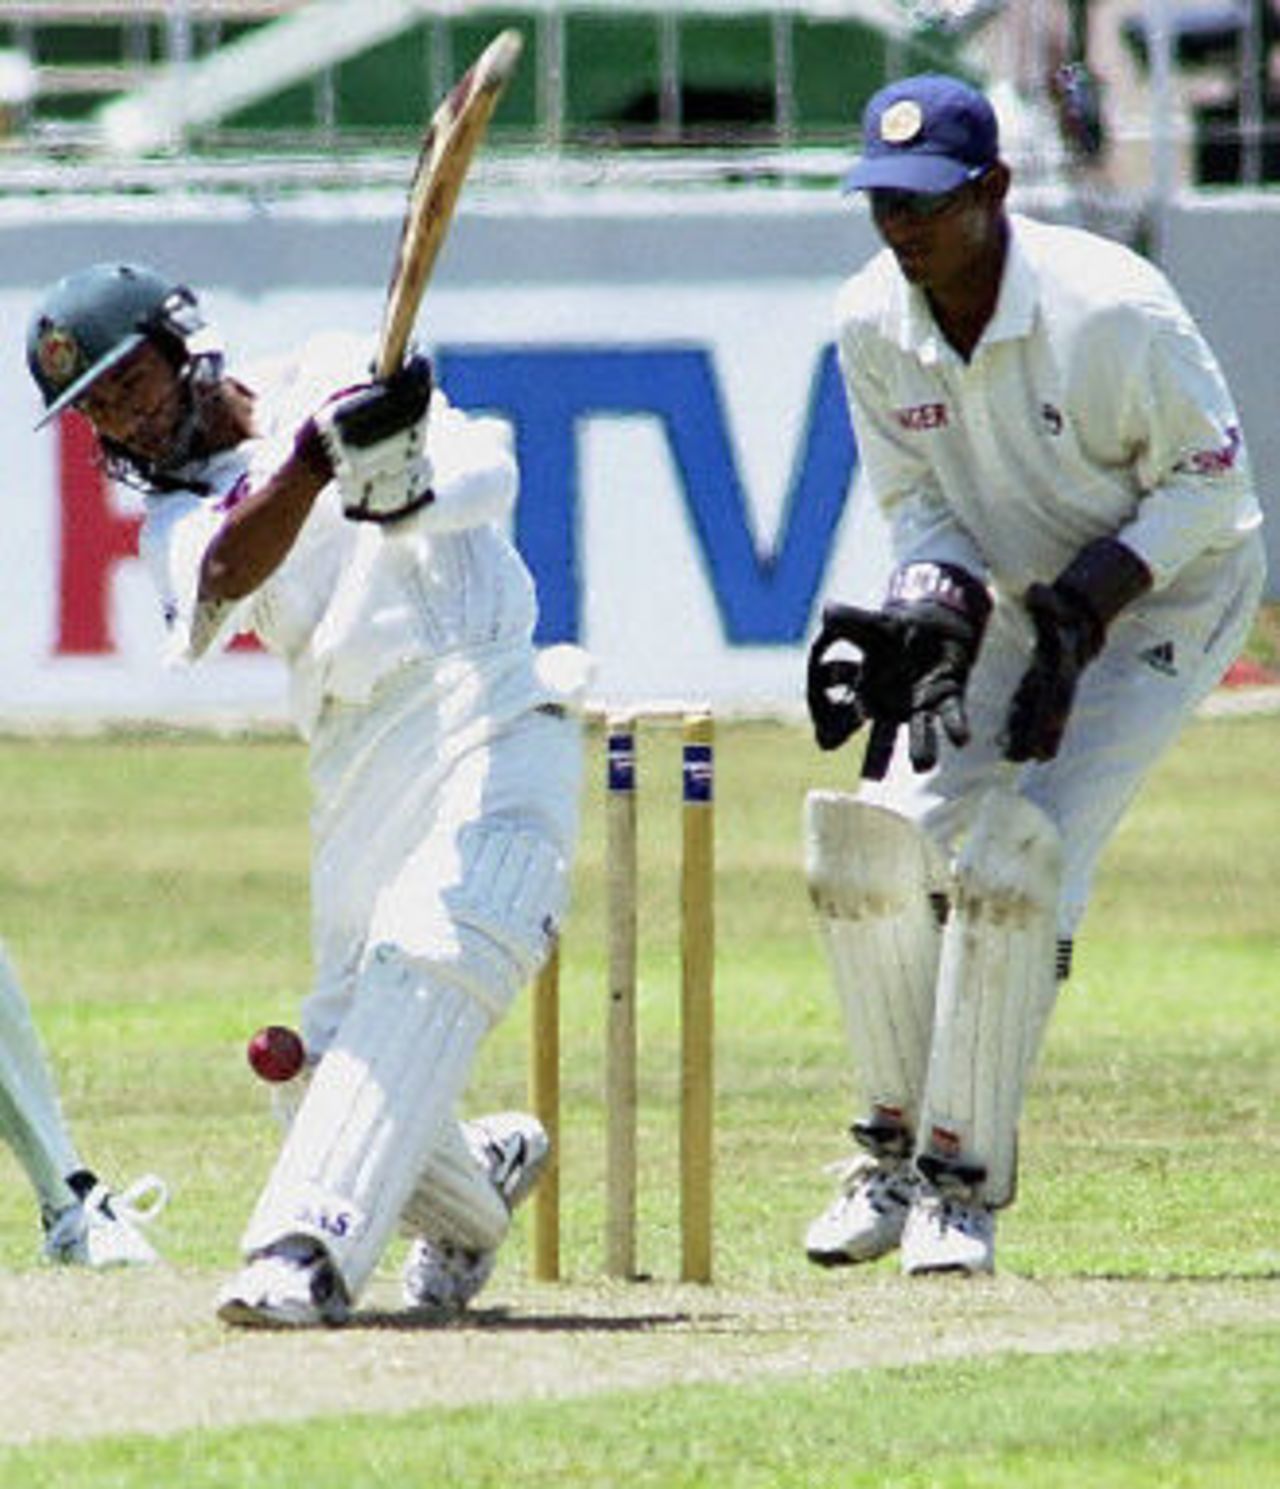 Mohammad Ashraful tries to heave the ball on the on-side, but is hit on the pads as Kumar Sangakkara looks on. Asian Test Championship 2001-02, 2nd Match, Sri Lanka v Bangladesh, Sinhalese Sports Club Ground.